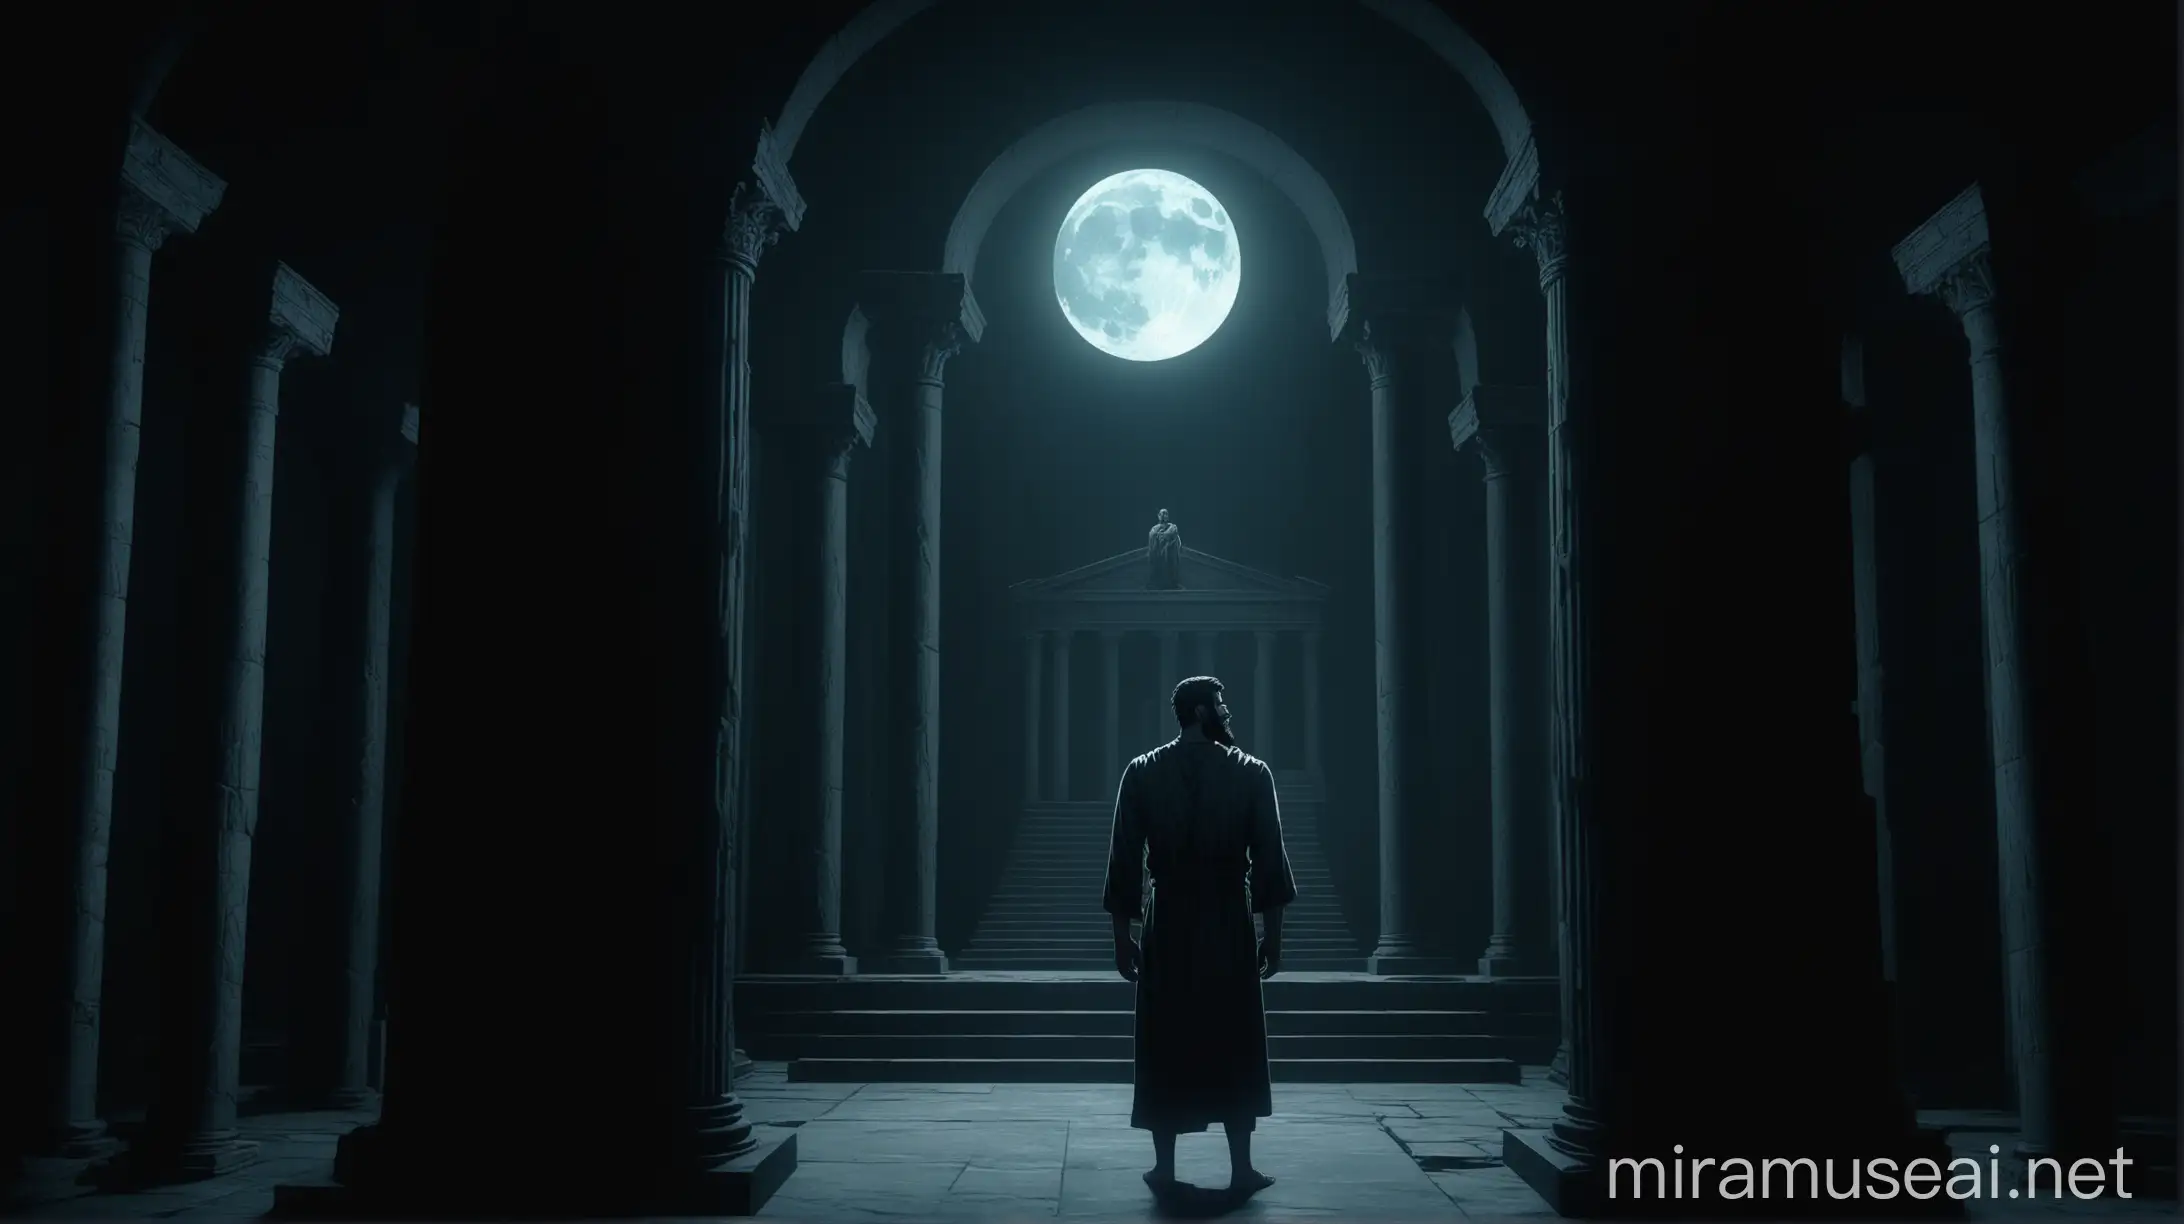 A close-up of a stoic, bearded man is rendered in a cinematic, smooth, and muscular anamorphic illustration. The composition, reminiscent of fascist aesthetics, employs a realistic anime art style with sculpted precision. The figure, shown from head to toe, stands against a backdrop of ancient stoic buildings. The moonlight filters through the ceiling, adding a mystical glow to the dark-mode image. The overall atmosphere is somber and dramatic, highlighting the character's resolute presence amidst a timeless setting.